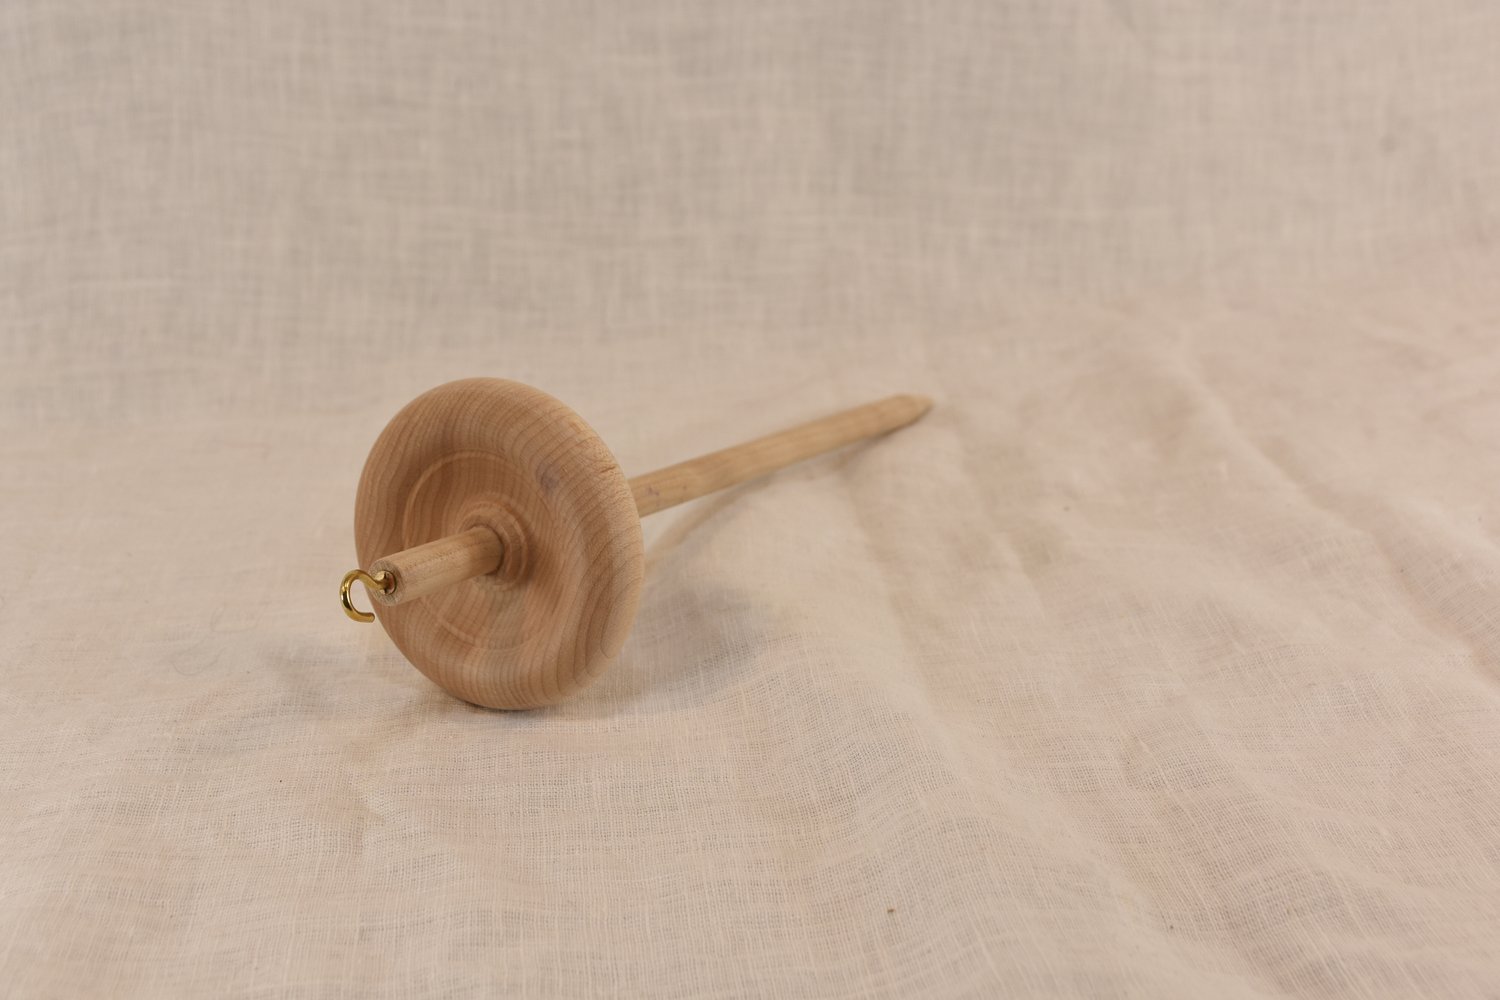 Drop Spindle Yarn Spinning Kit – Coates & Co.